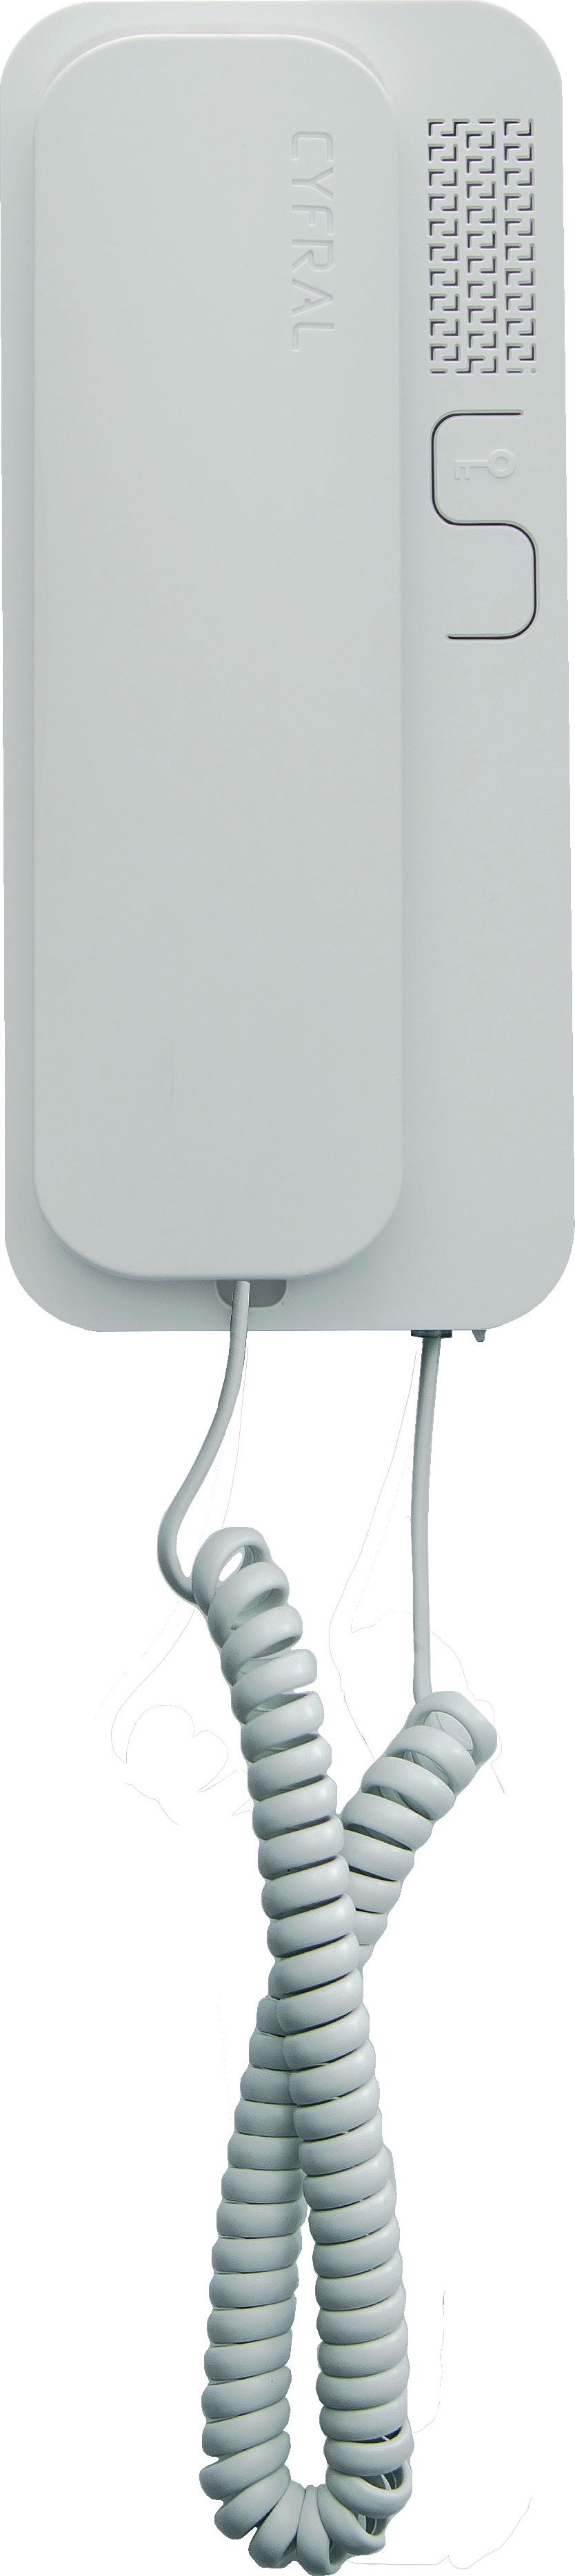 CYFRAL Multi-room uniphone for 2-wire installations SMART WHITE - SMART WHITE